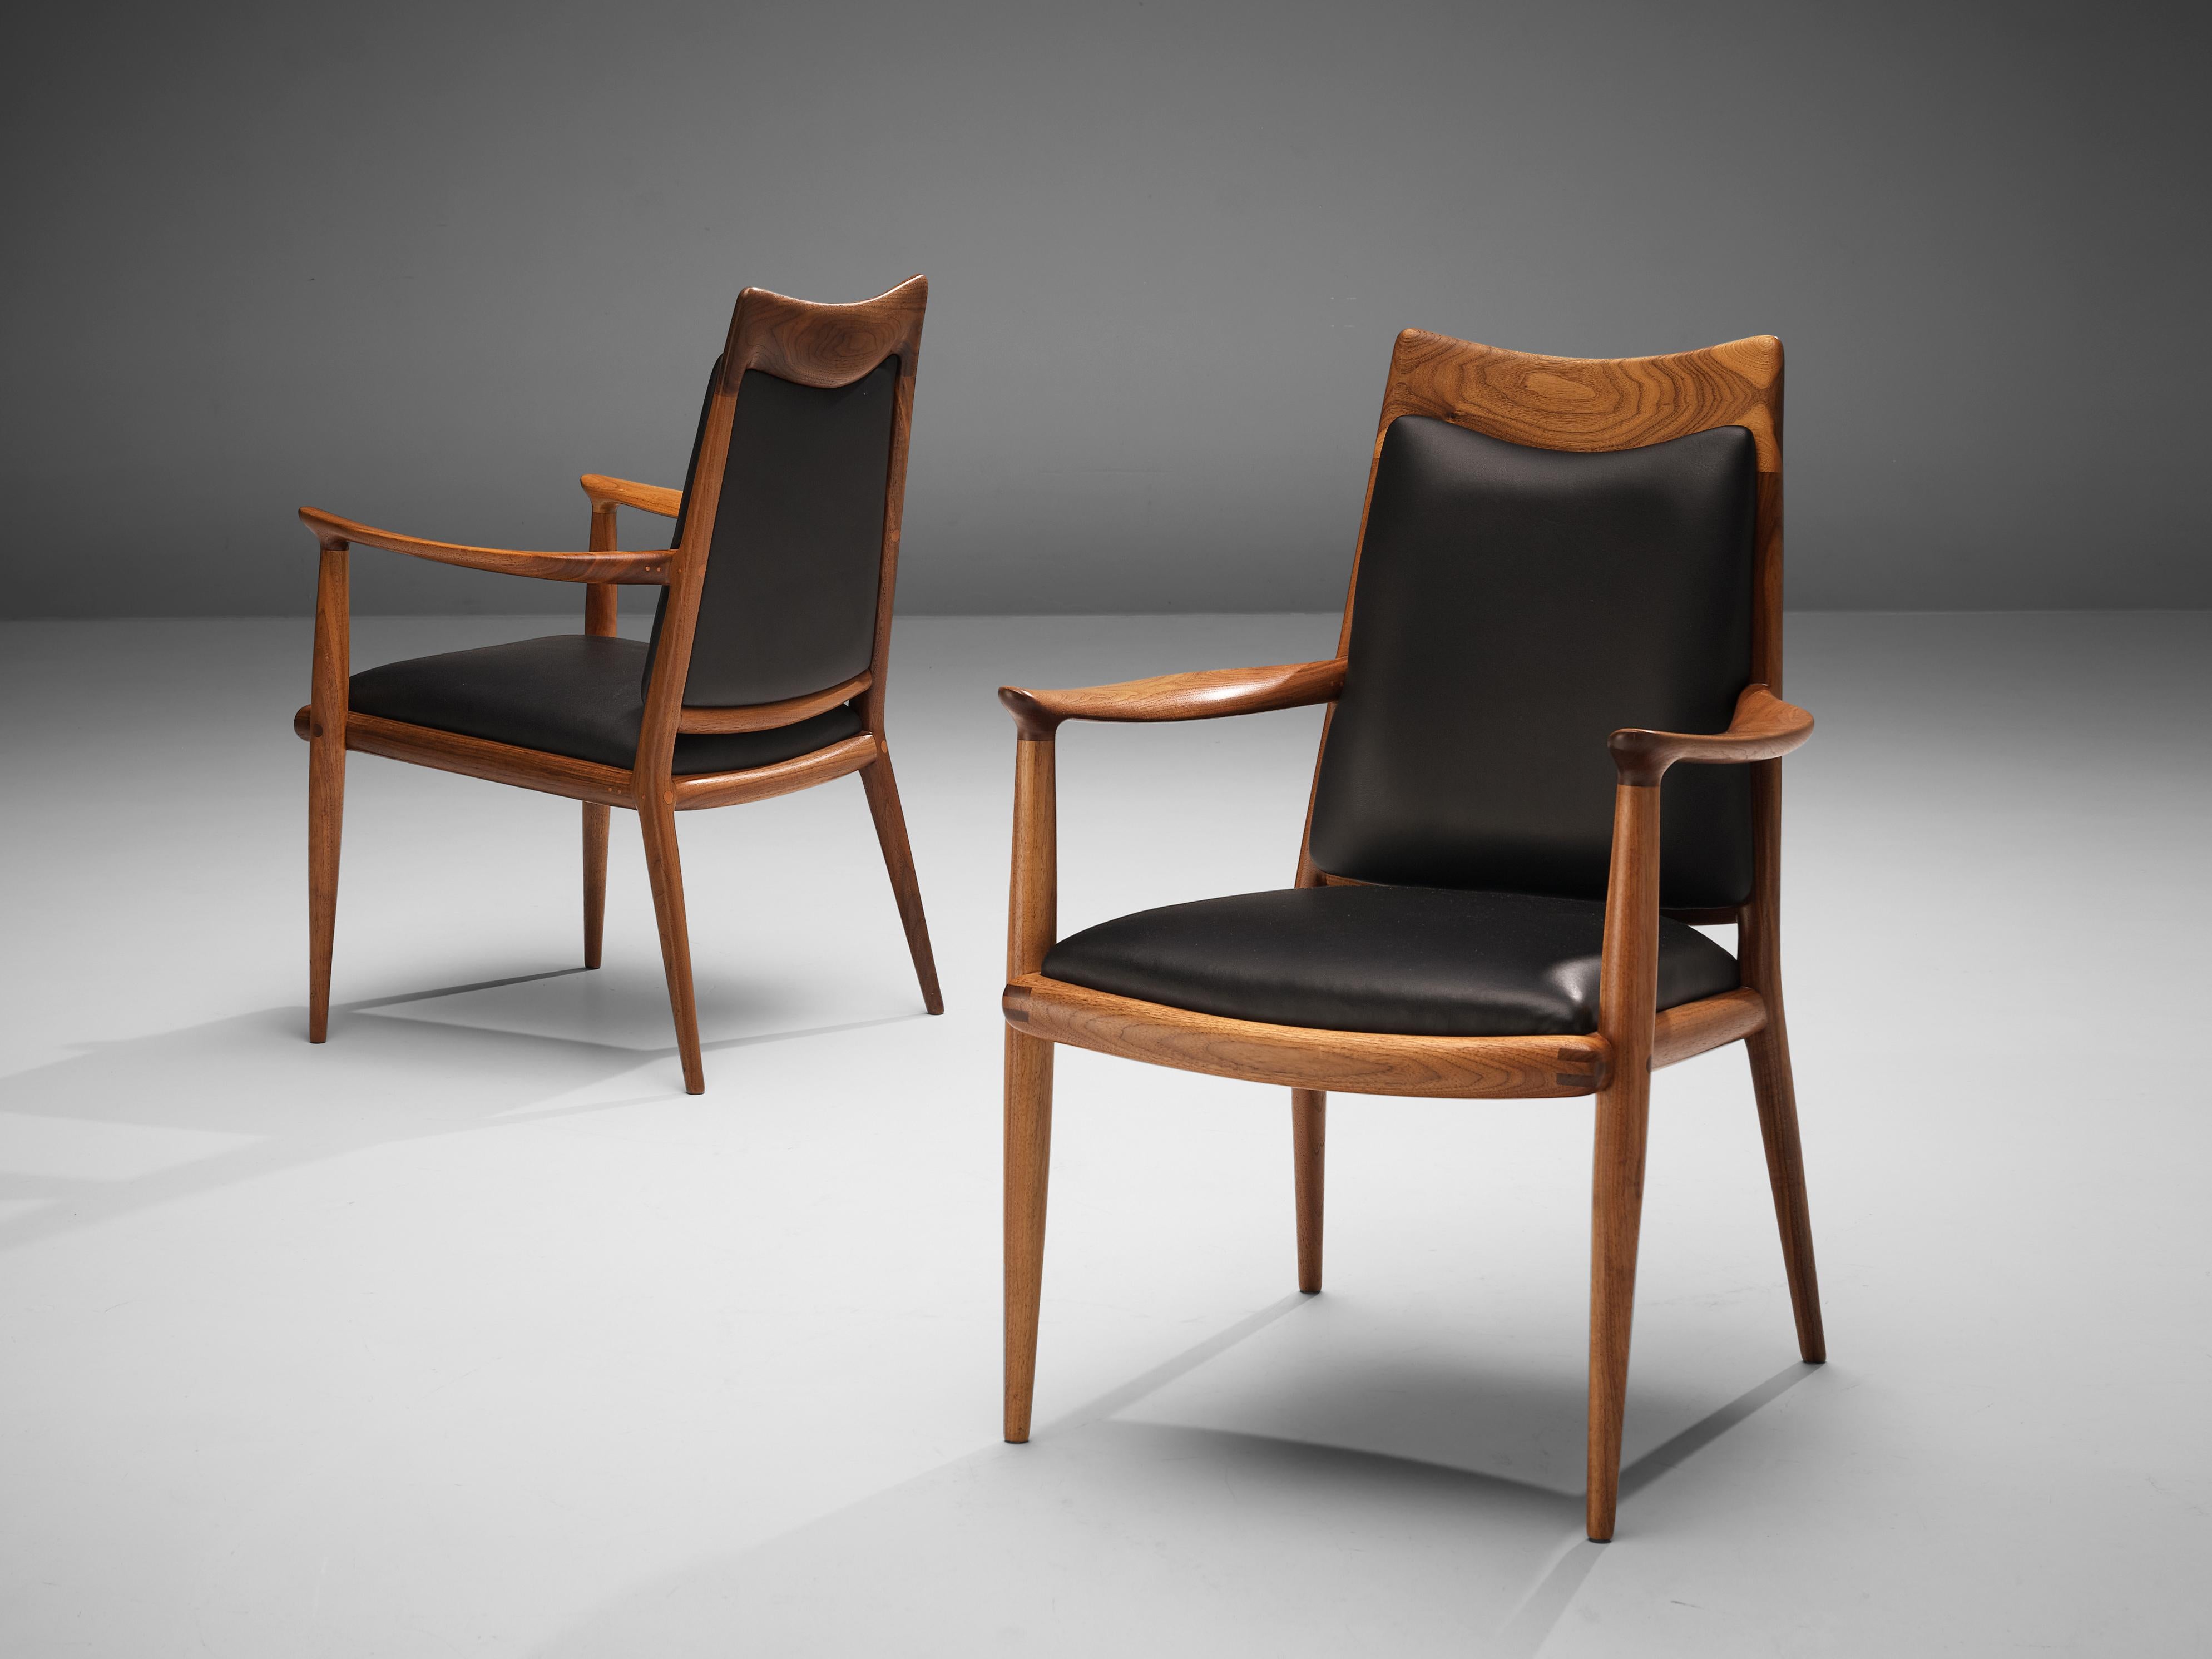 Sam Maloof, dining chairs, walnut, black leather, United States, 1960s

Exquisite armchairs by renowned American designer Sam Maloof. Famous for his handcrafted furniture with strong lines, expressive grain and admirable joints this rare set is a